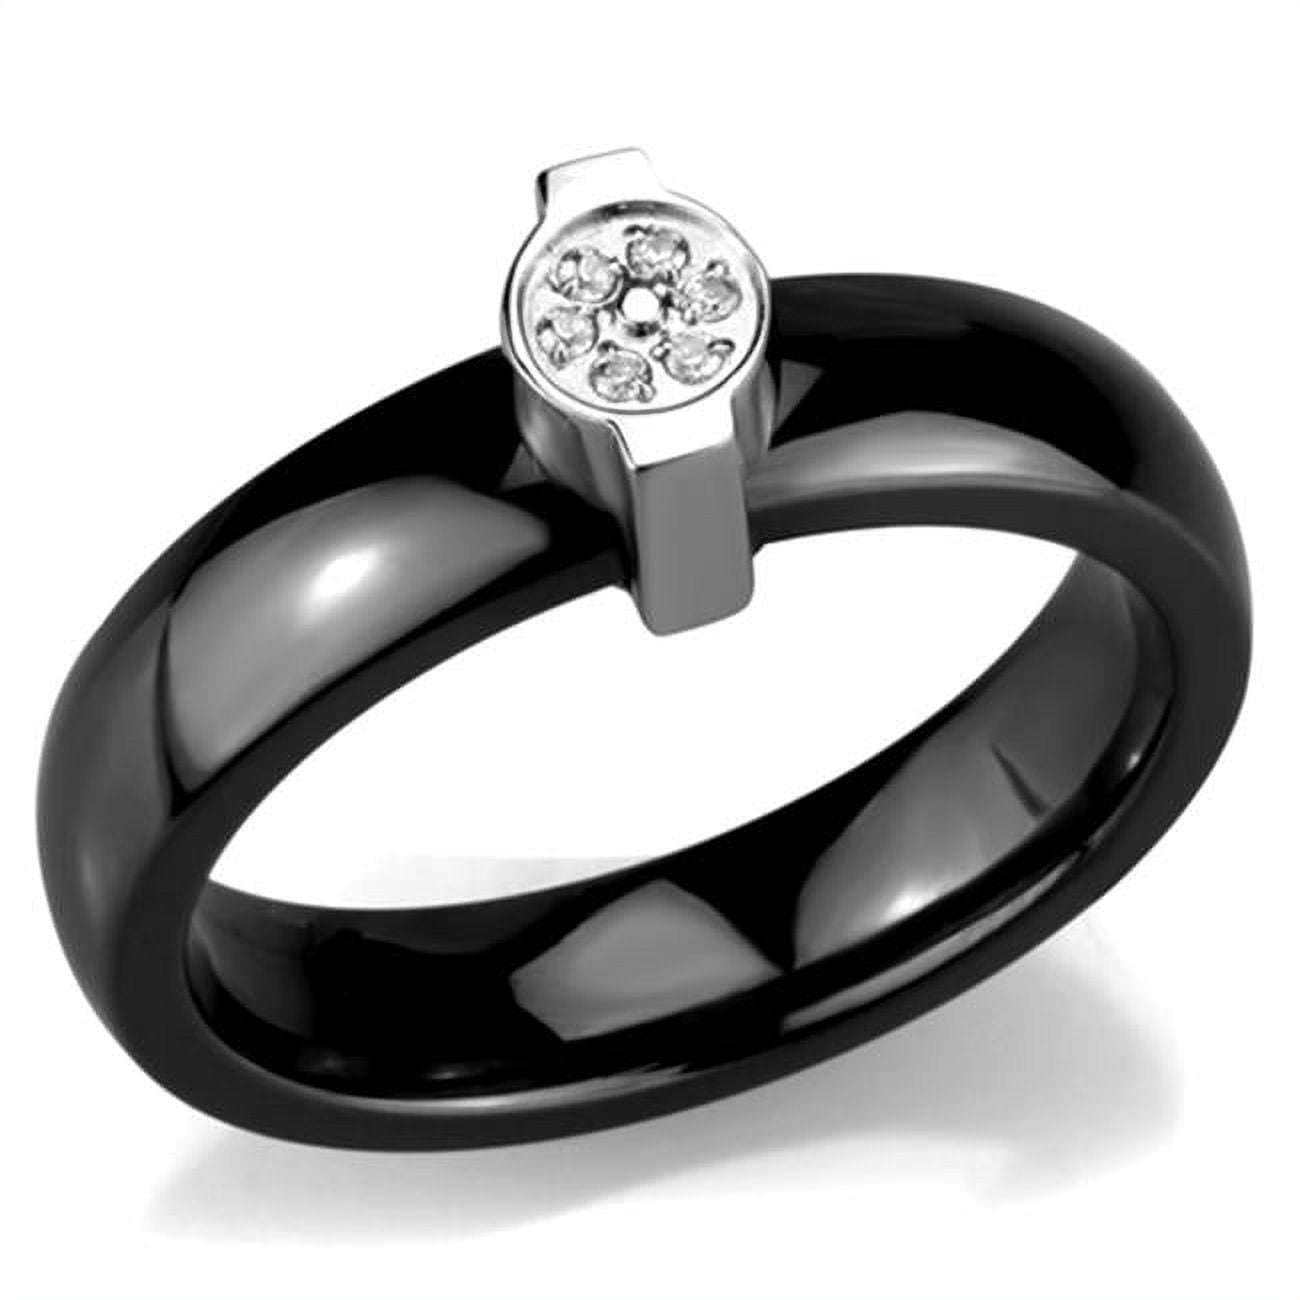 Picture of Alamode 3W959-8 Women High Polished Stainless Steel Ring with Ceramic in Jet - Size 8